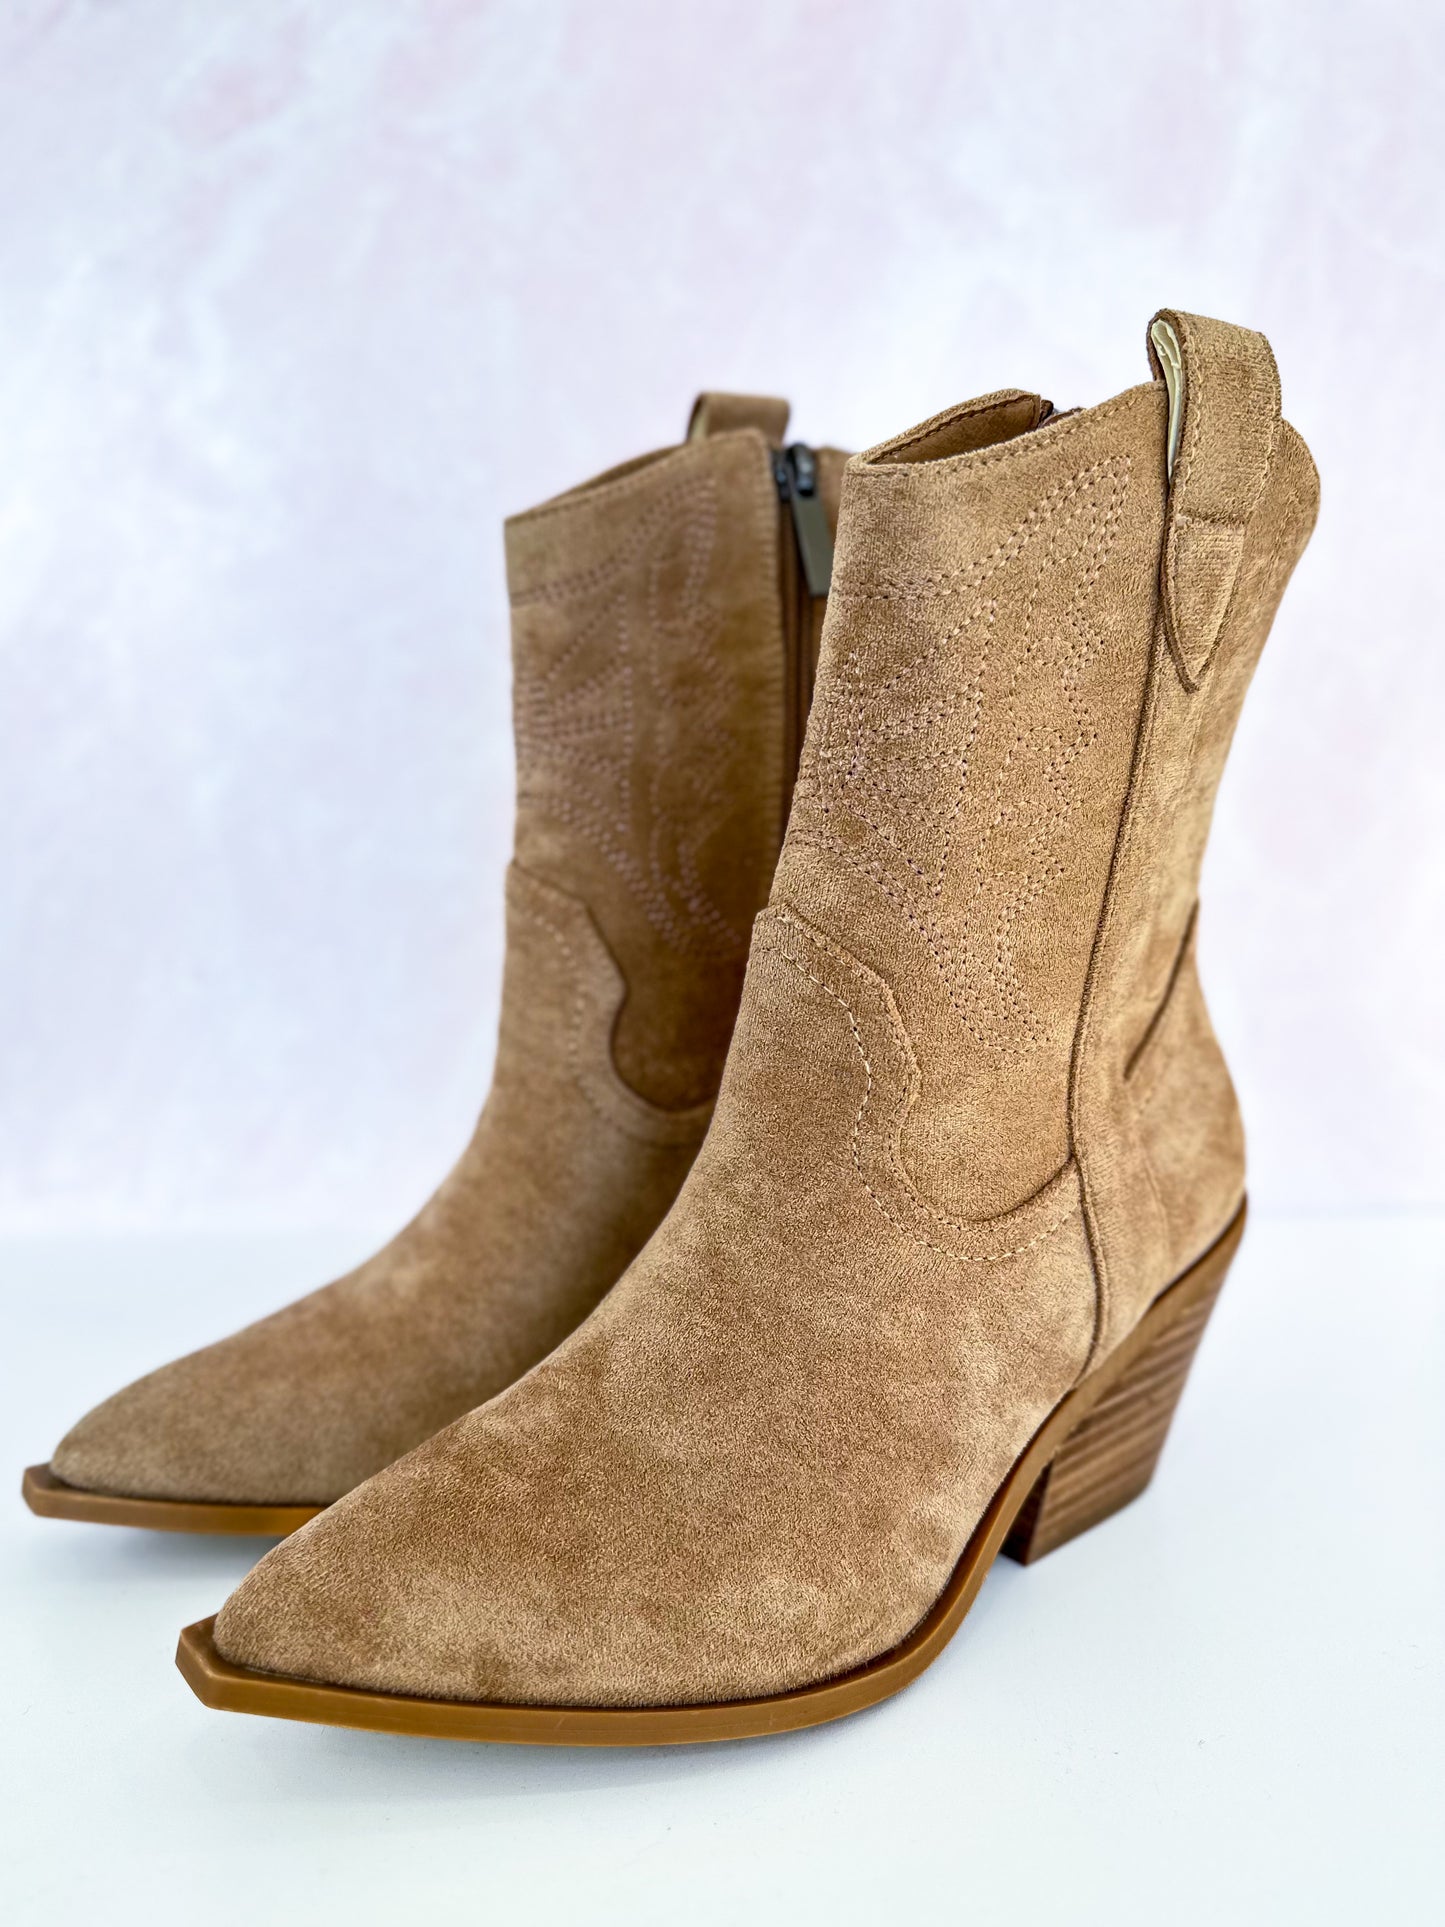 Corky's Rowdy Boot - Camel Suede